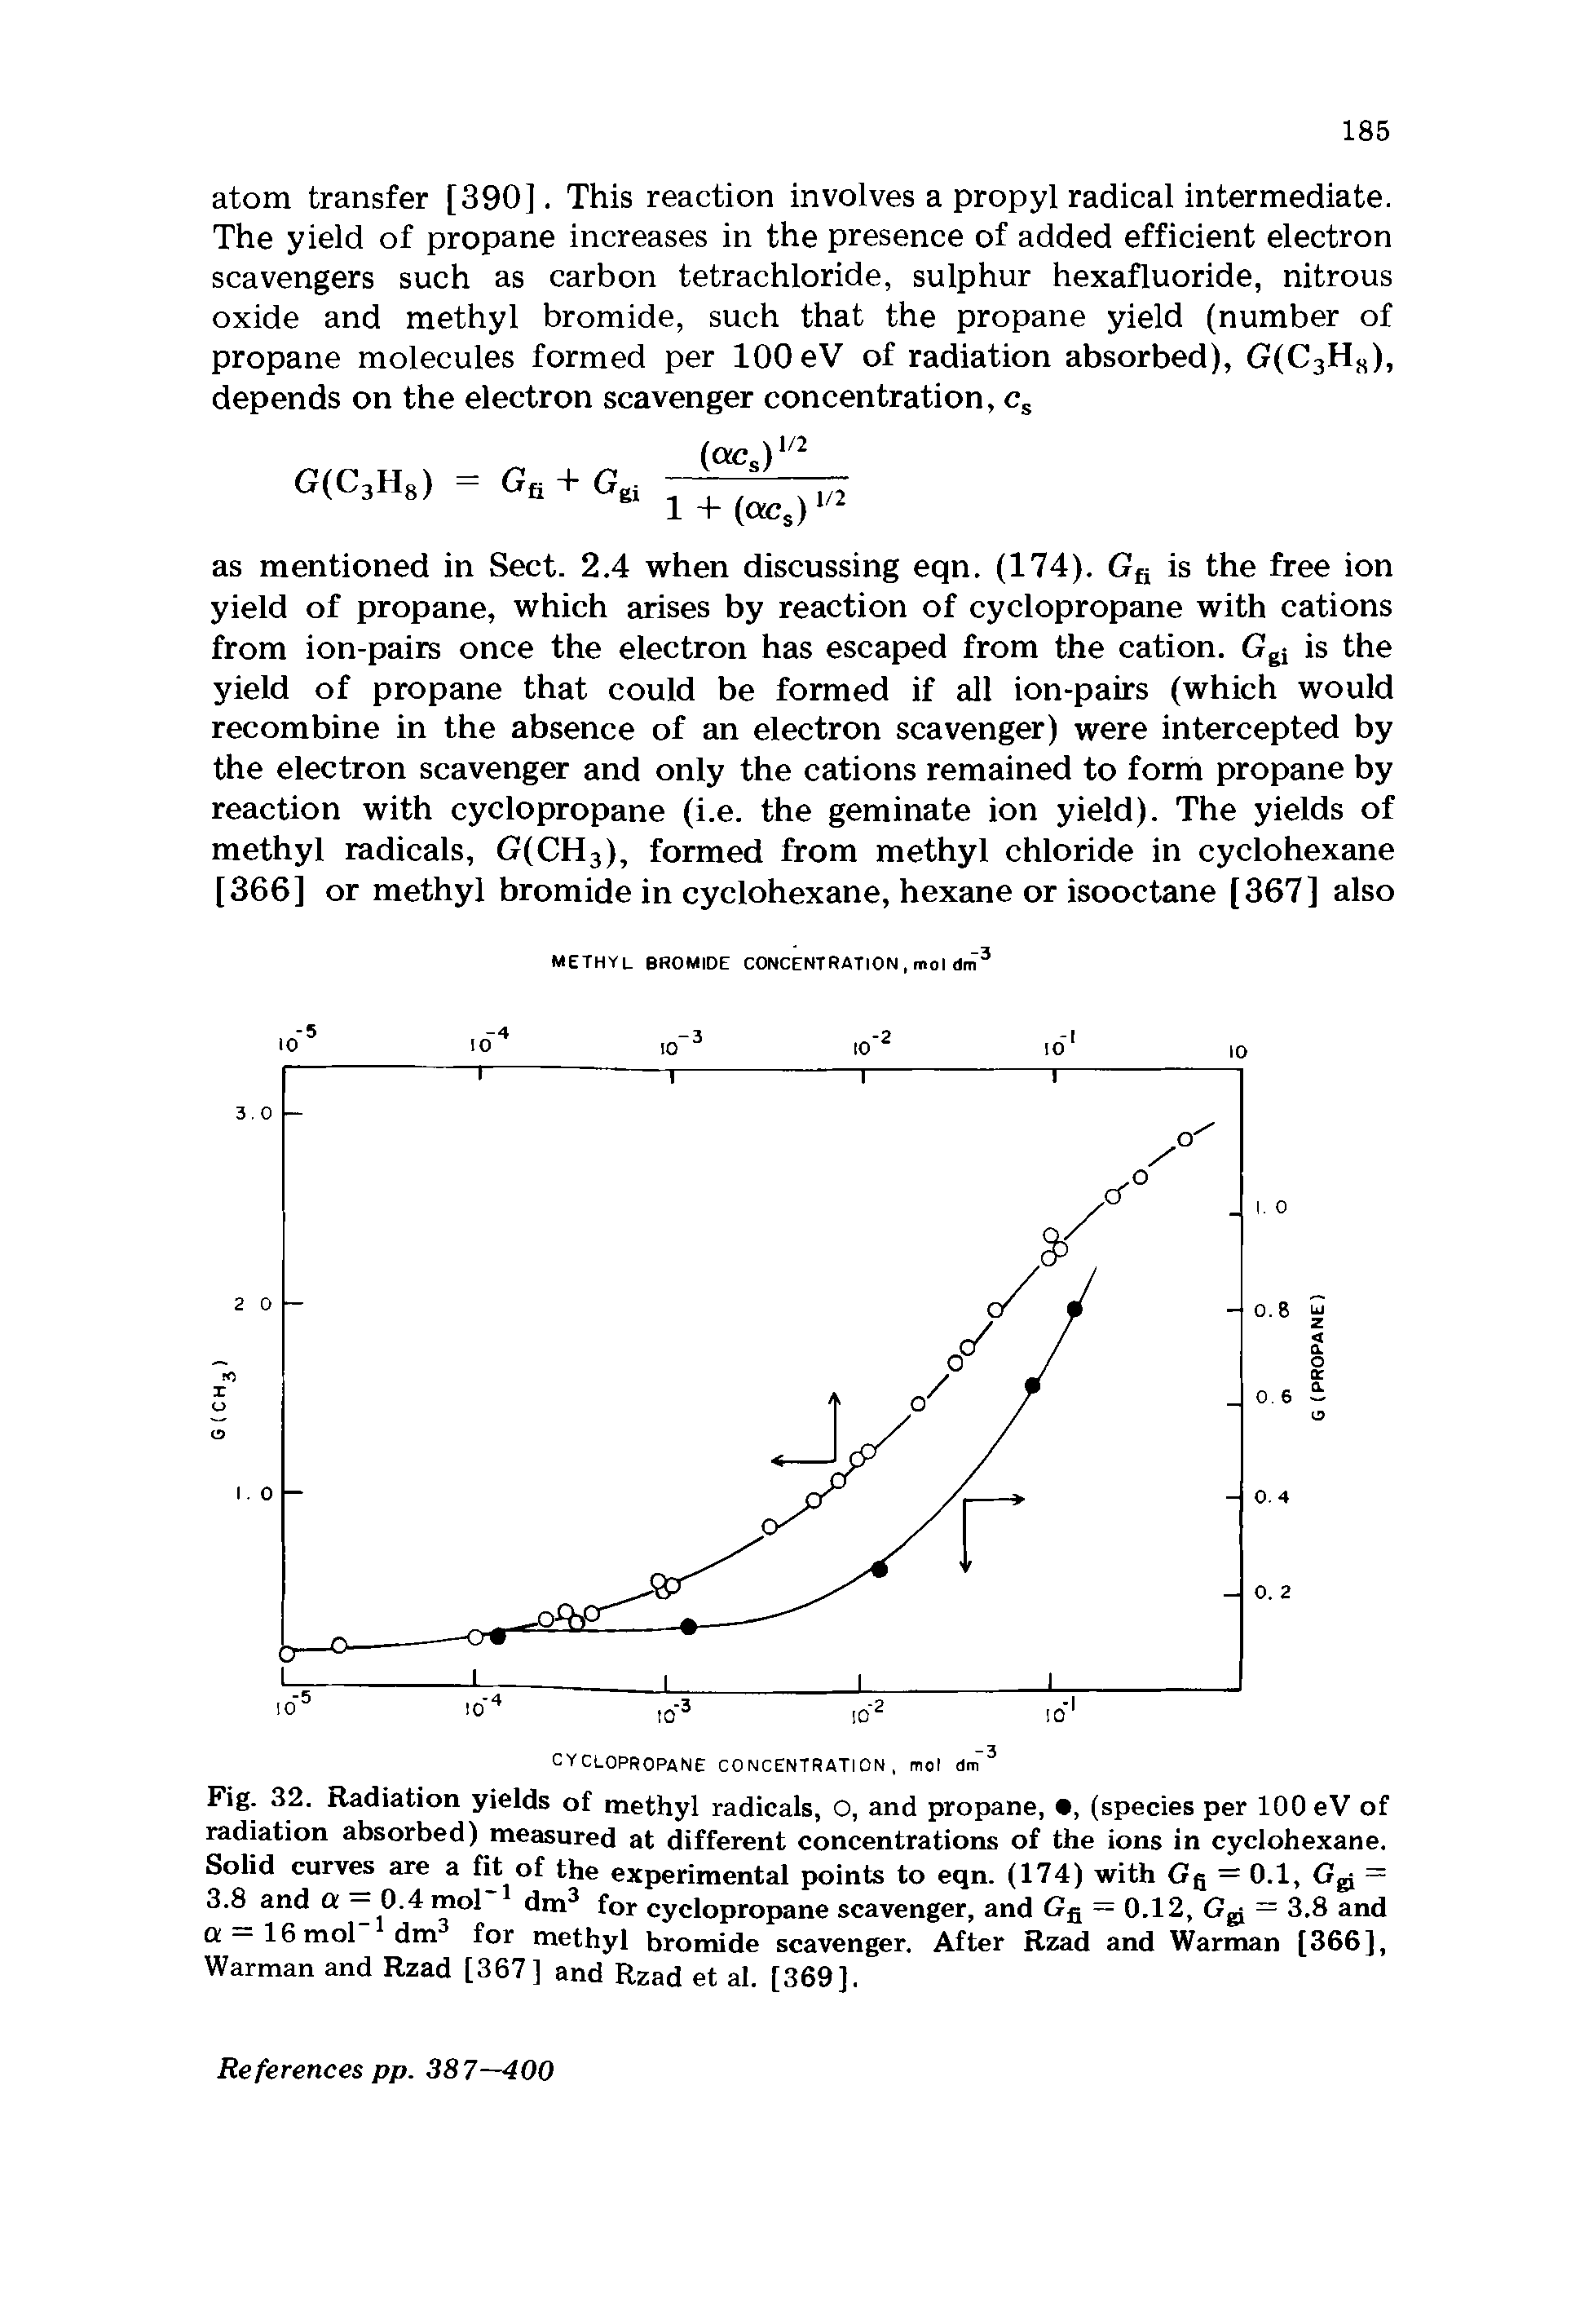 Fig. 32. Radiation yields of methyl radicals, O, and propane, , (species per 100 eV of radiation absorbed) measured at different concentrations of the ions in cyclohexane. Solid curves are a fit of the experimental points to eqn. (174) with Gg = 0.1, Ggj = 3.8 and a — 0.4 mol dm3 for cyclopropane scavenger, and Gfi = 0.12, Gg, = 3.8 and a —16 mol dm for methyl bromide scavenger. After Rzad and Warman [366], Warman and Rzad [367] and Rzad et al. [369],...